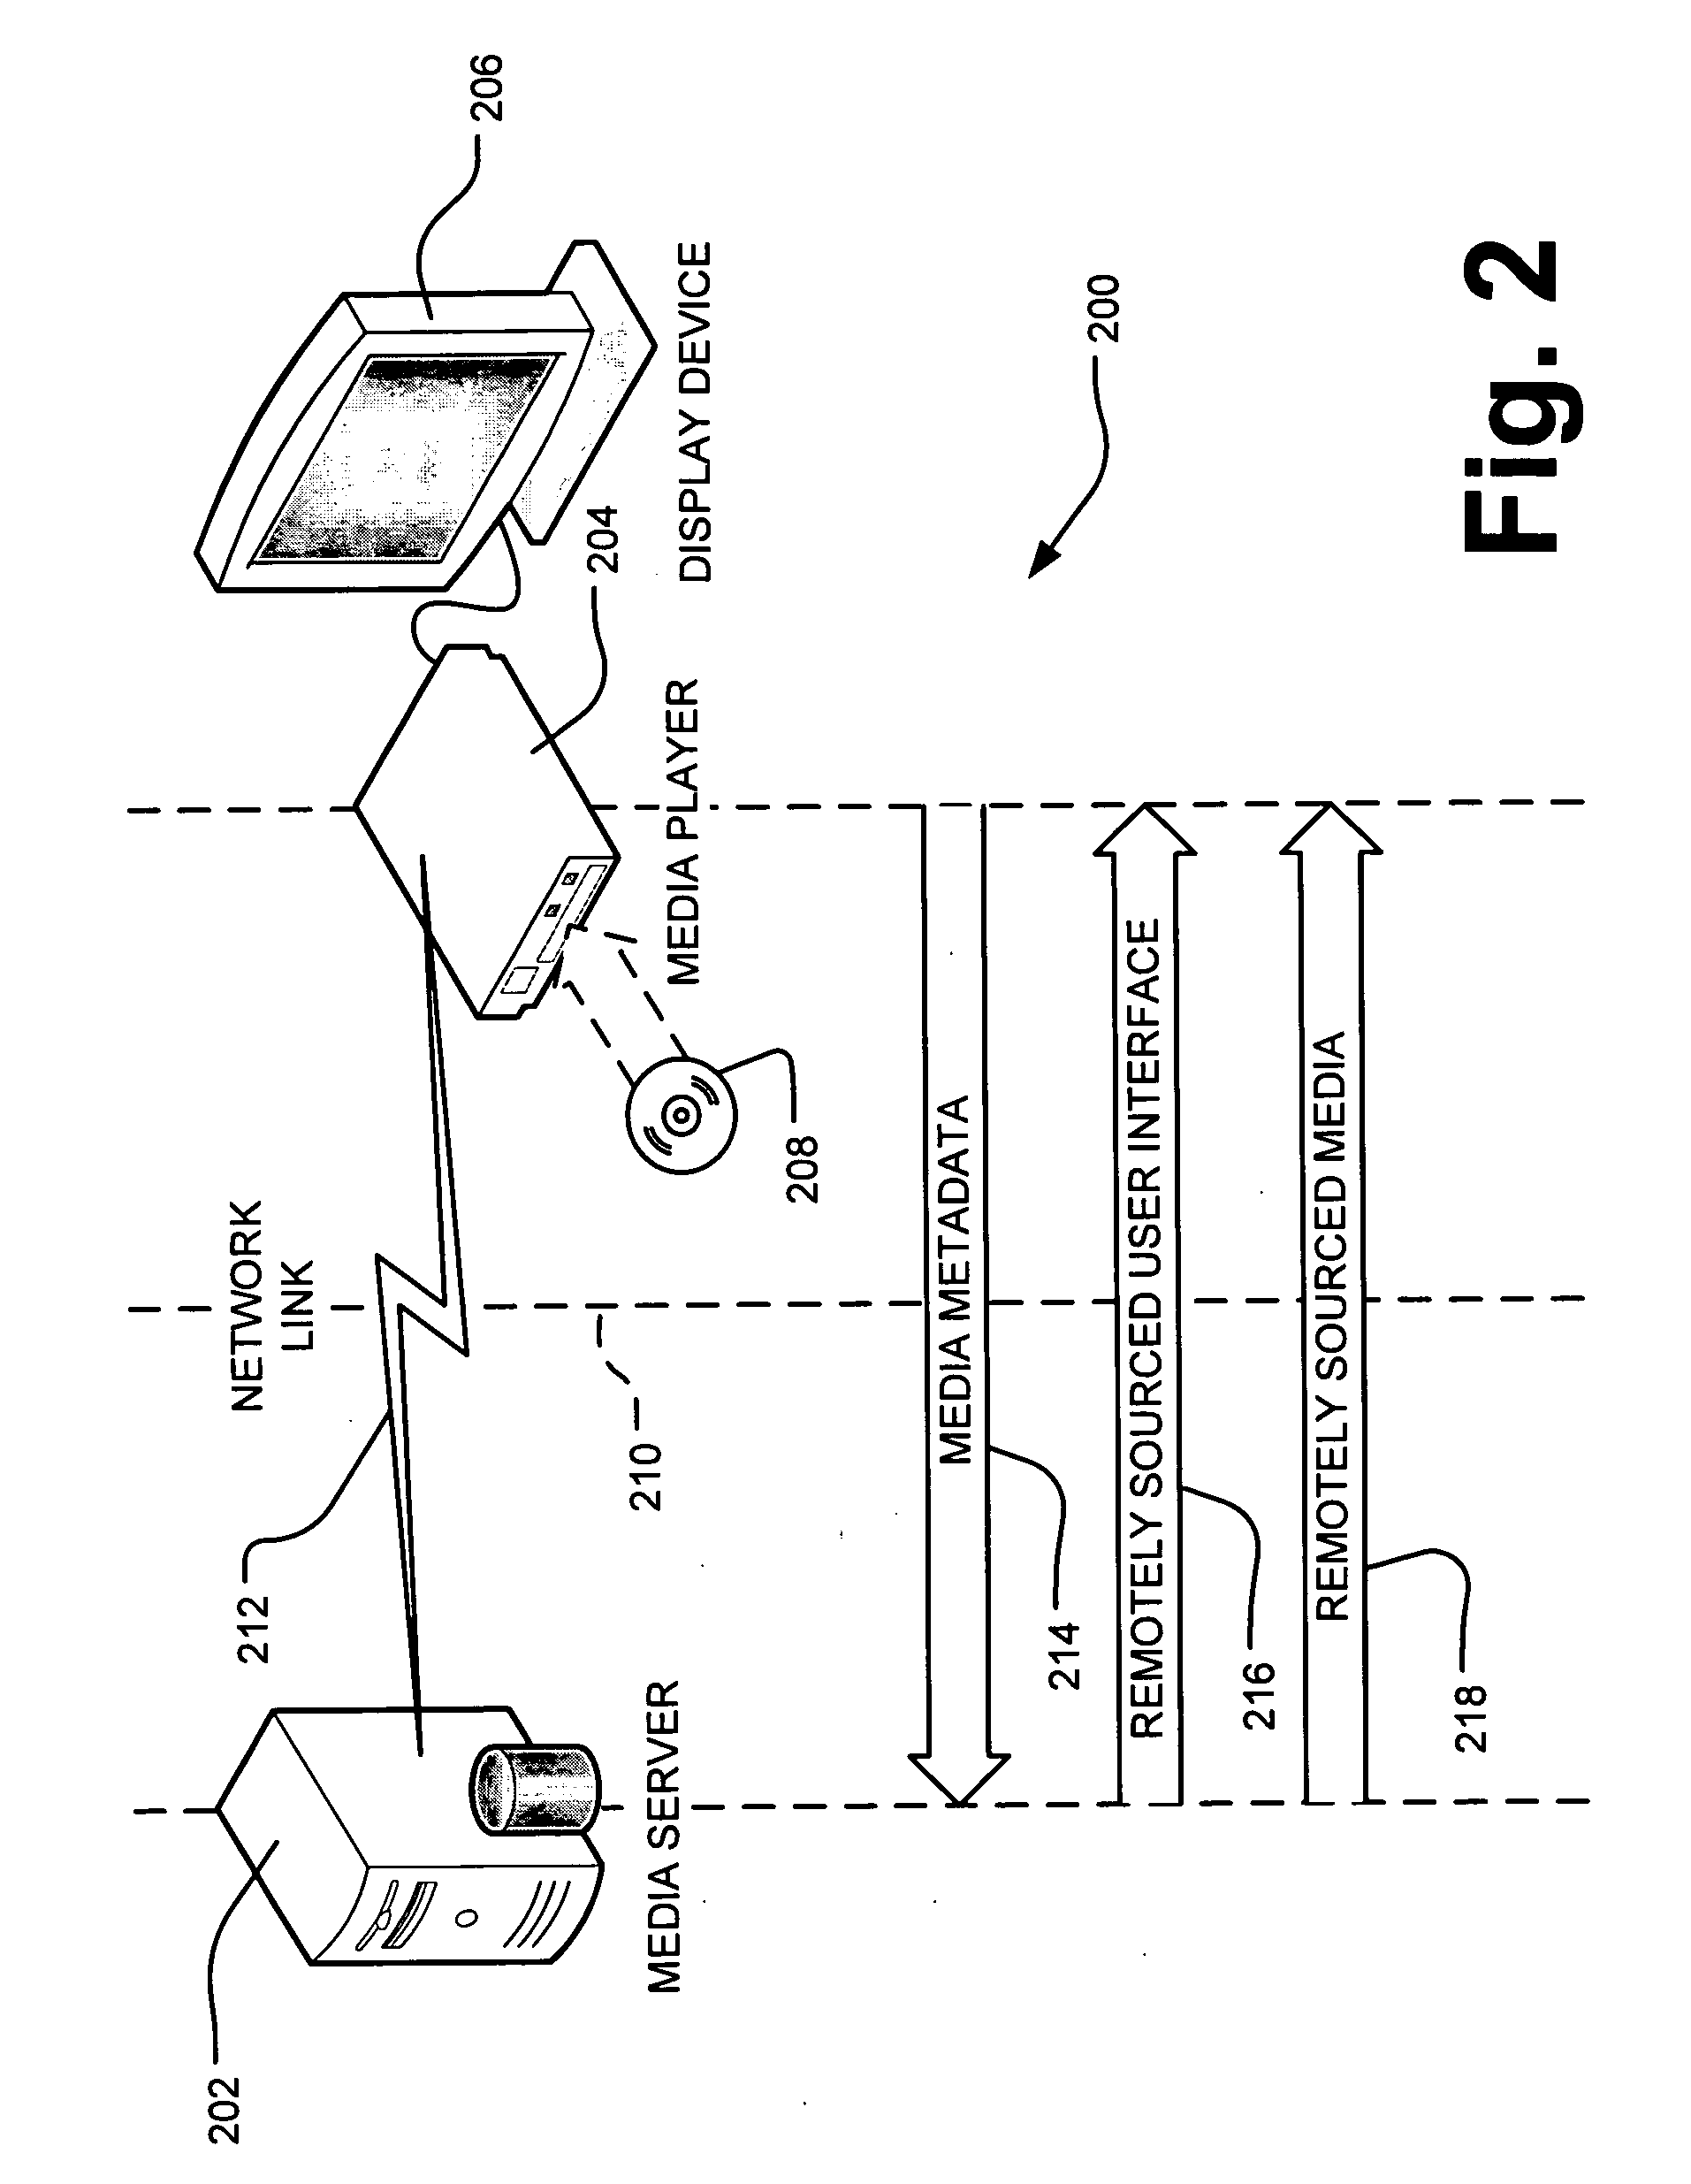 Composition of local media playback with remotely generated user interface